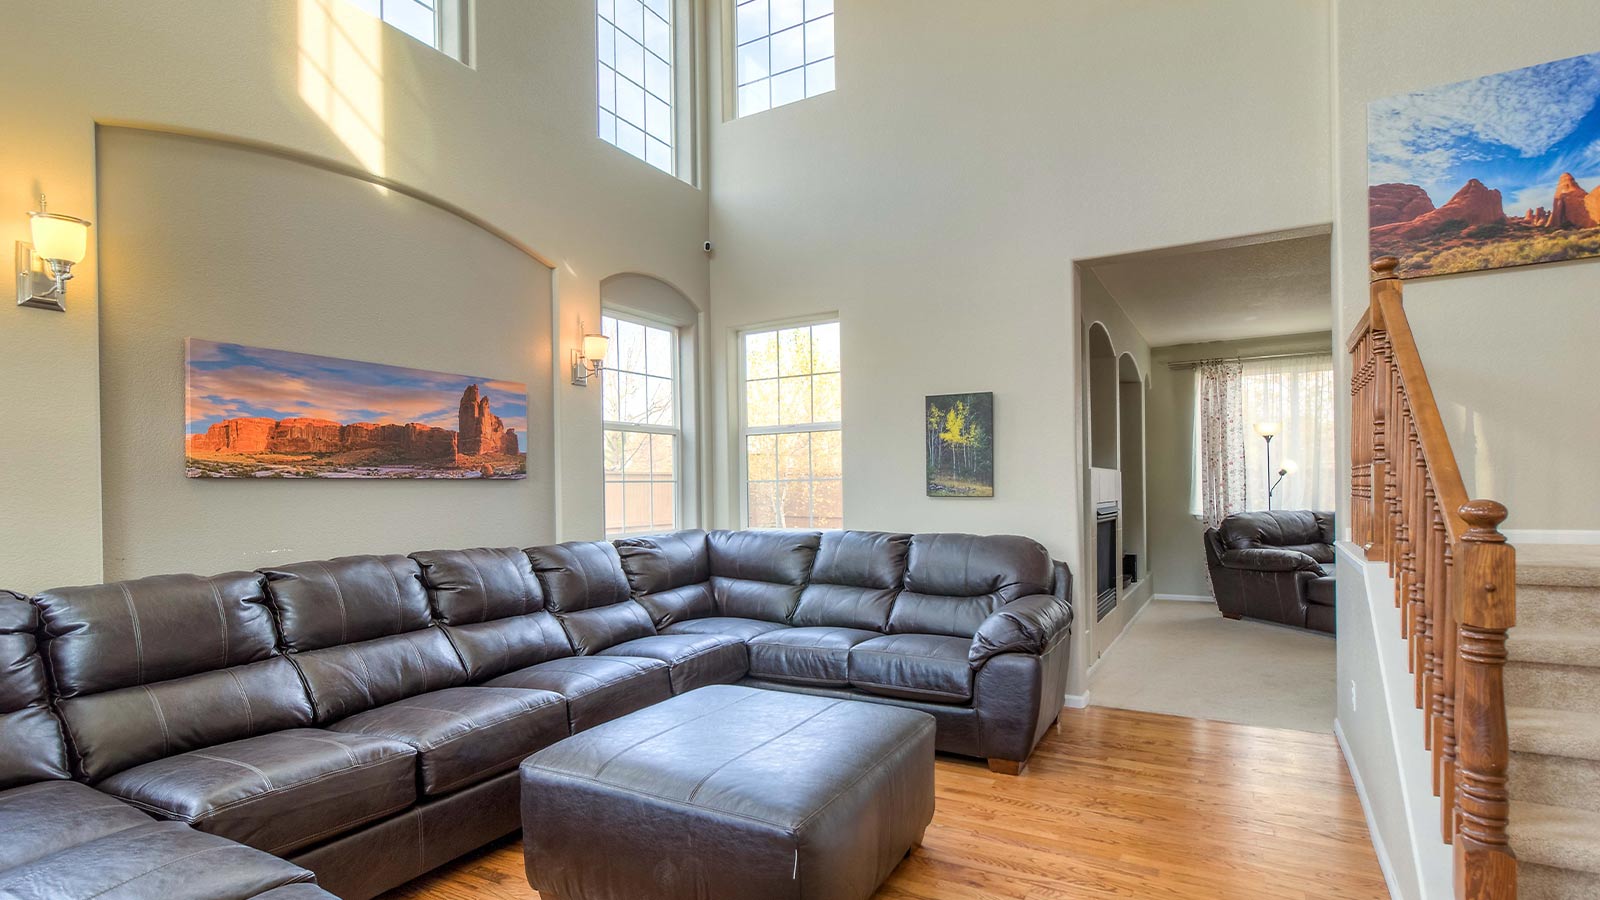 A spacious living room with a large leather sectional sofa and high ceilings.